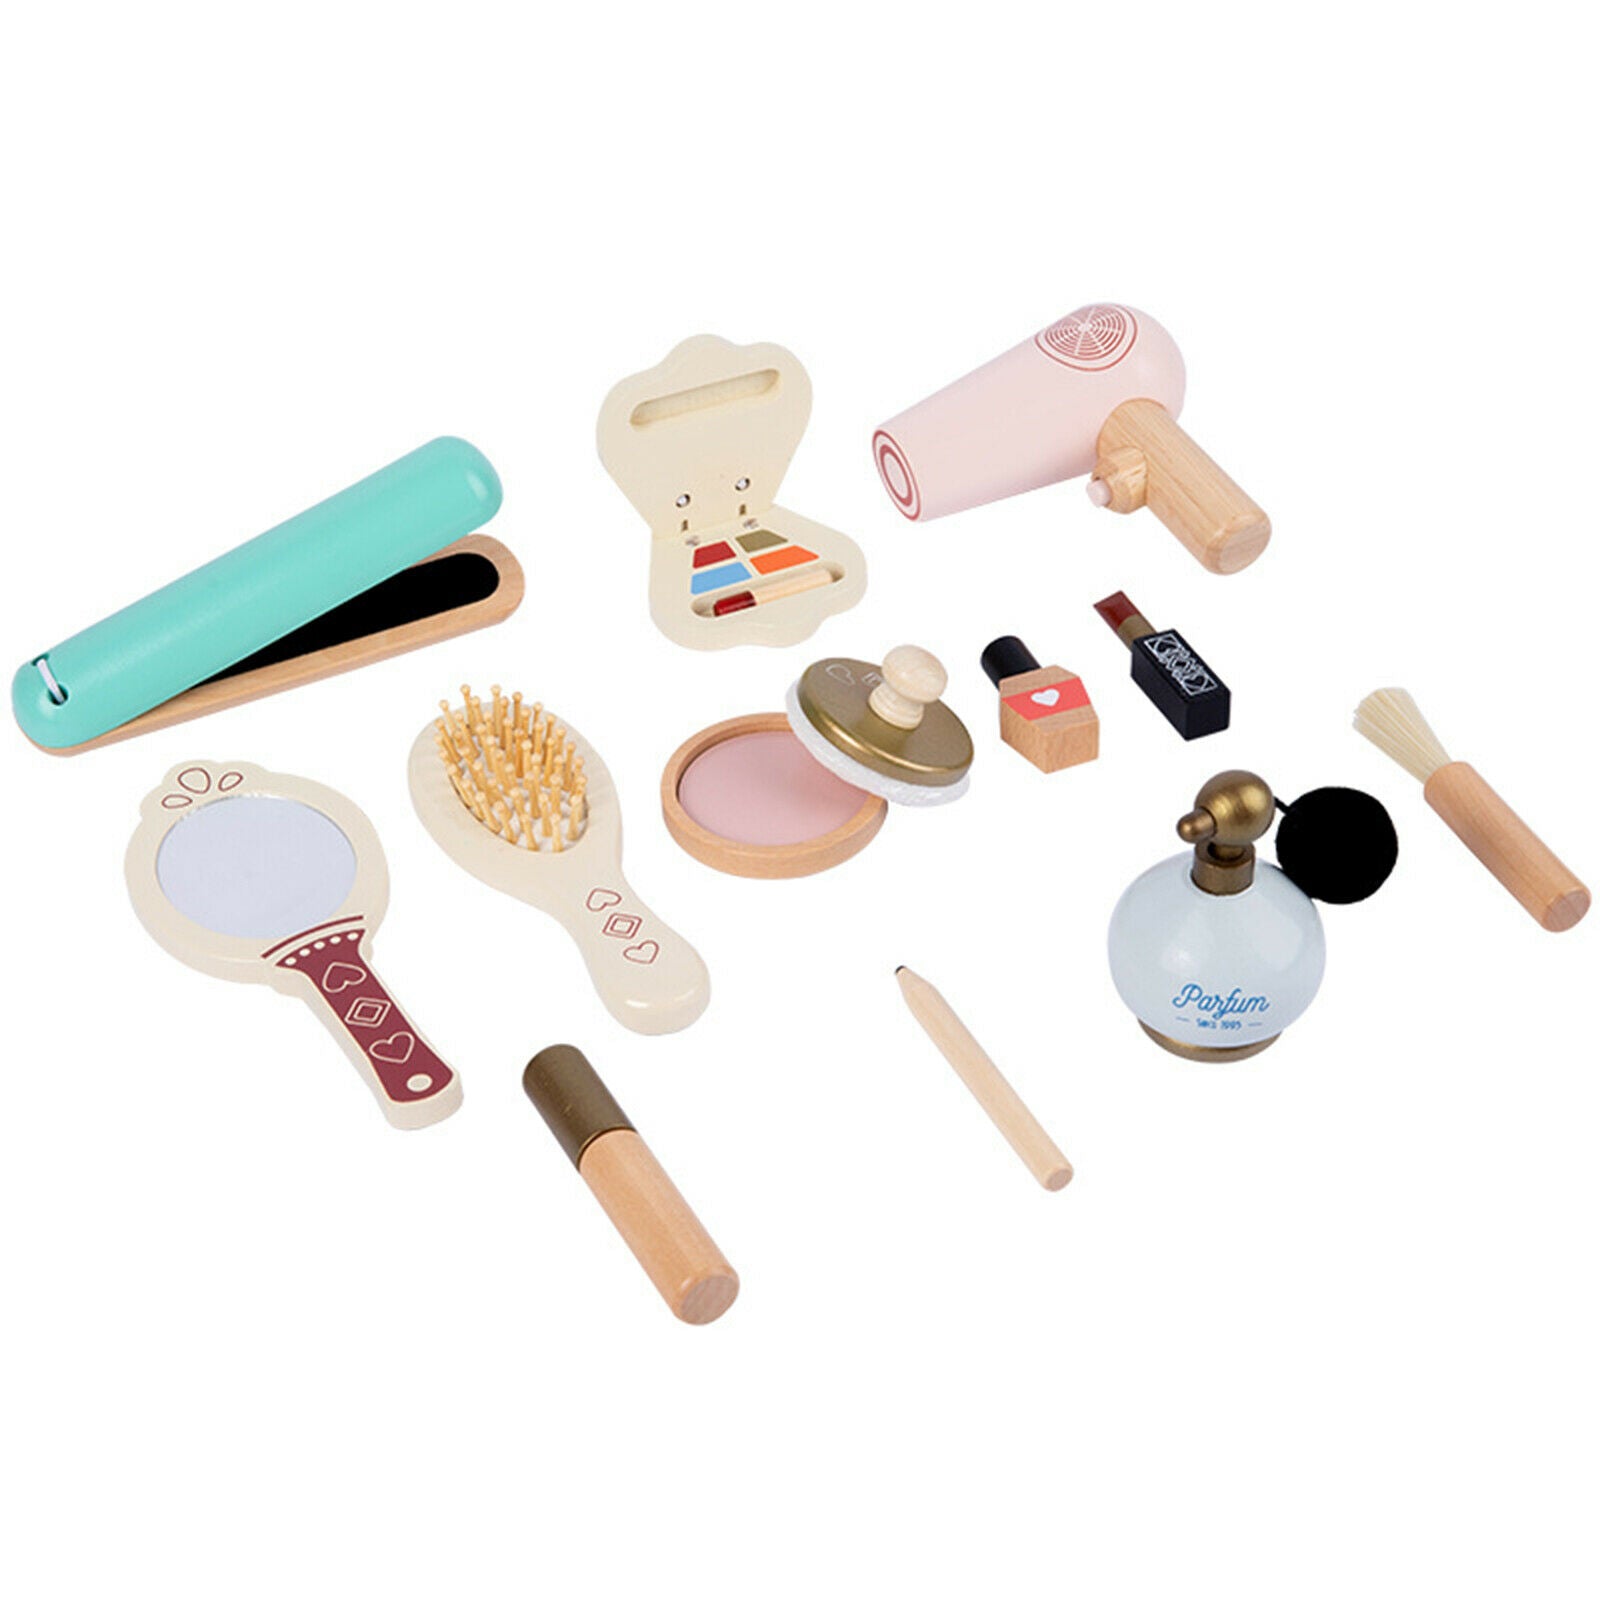 12pcs Wooden Kids Makeup Kit Role Play Curling Iron Brush Perfume Gifts